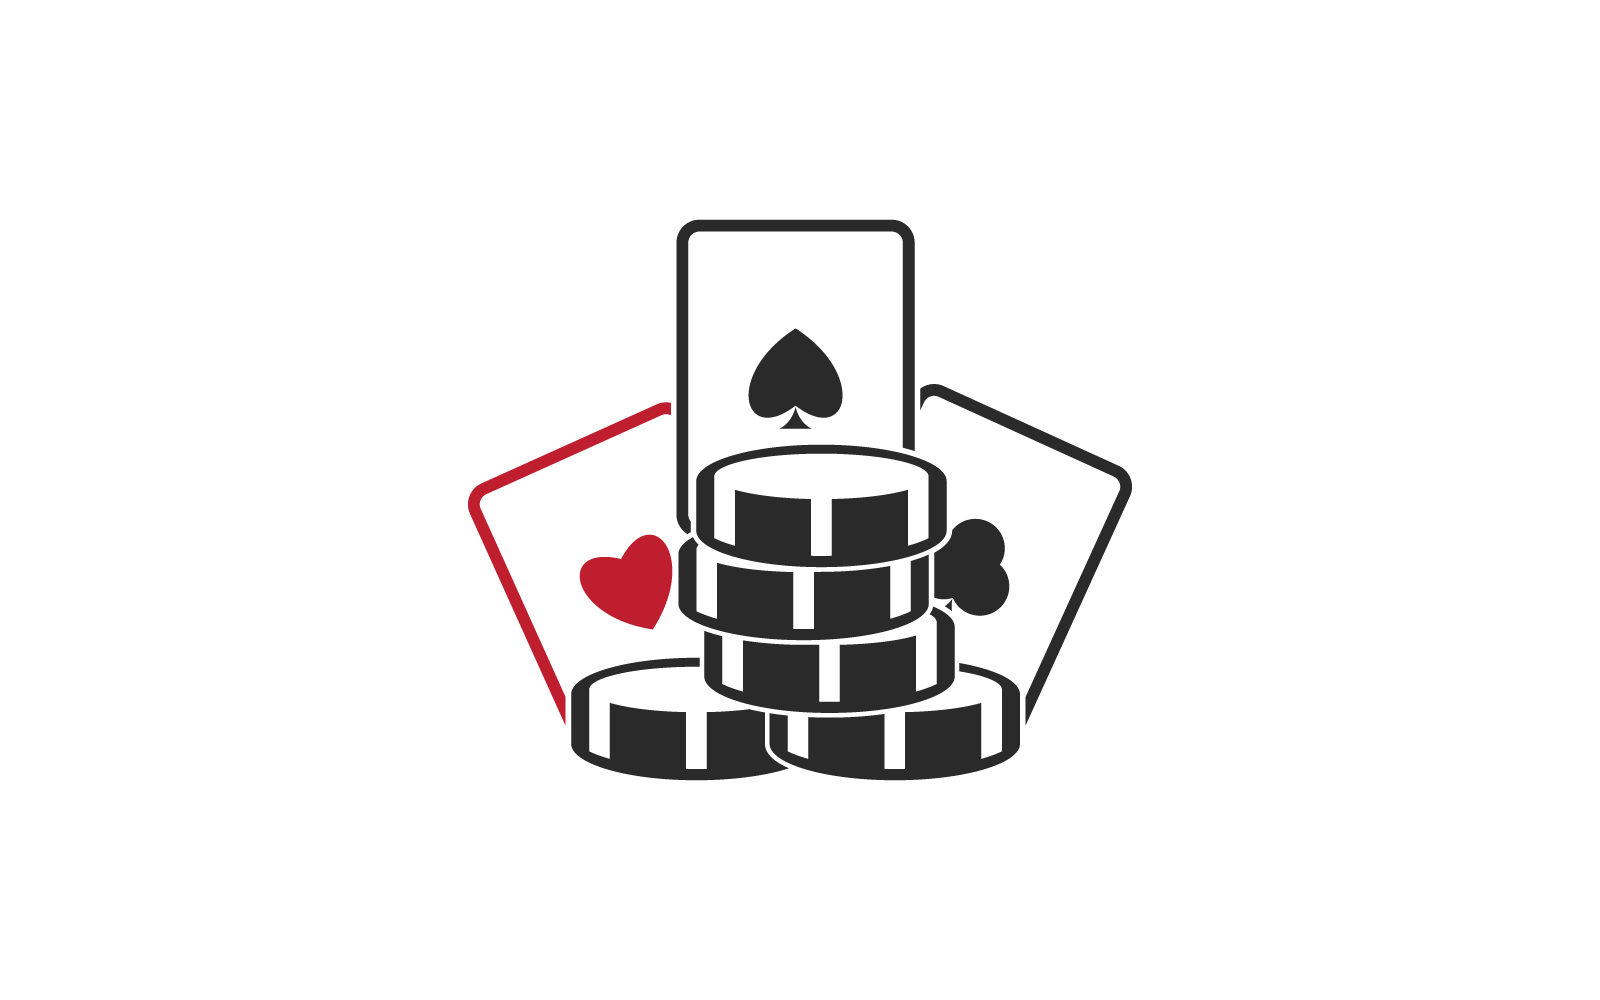 Playing card icon vector design template illustration